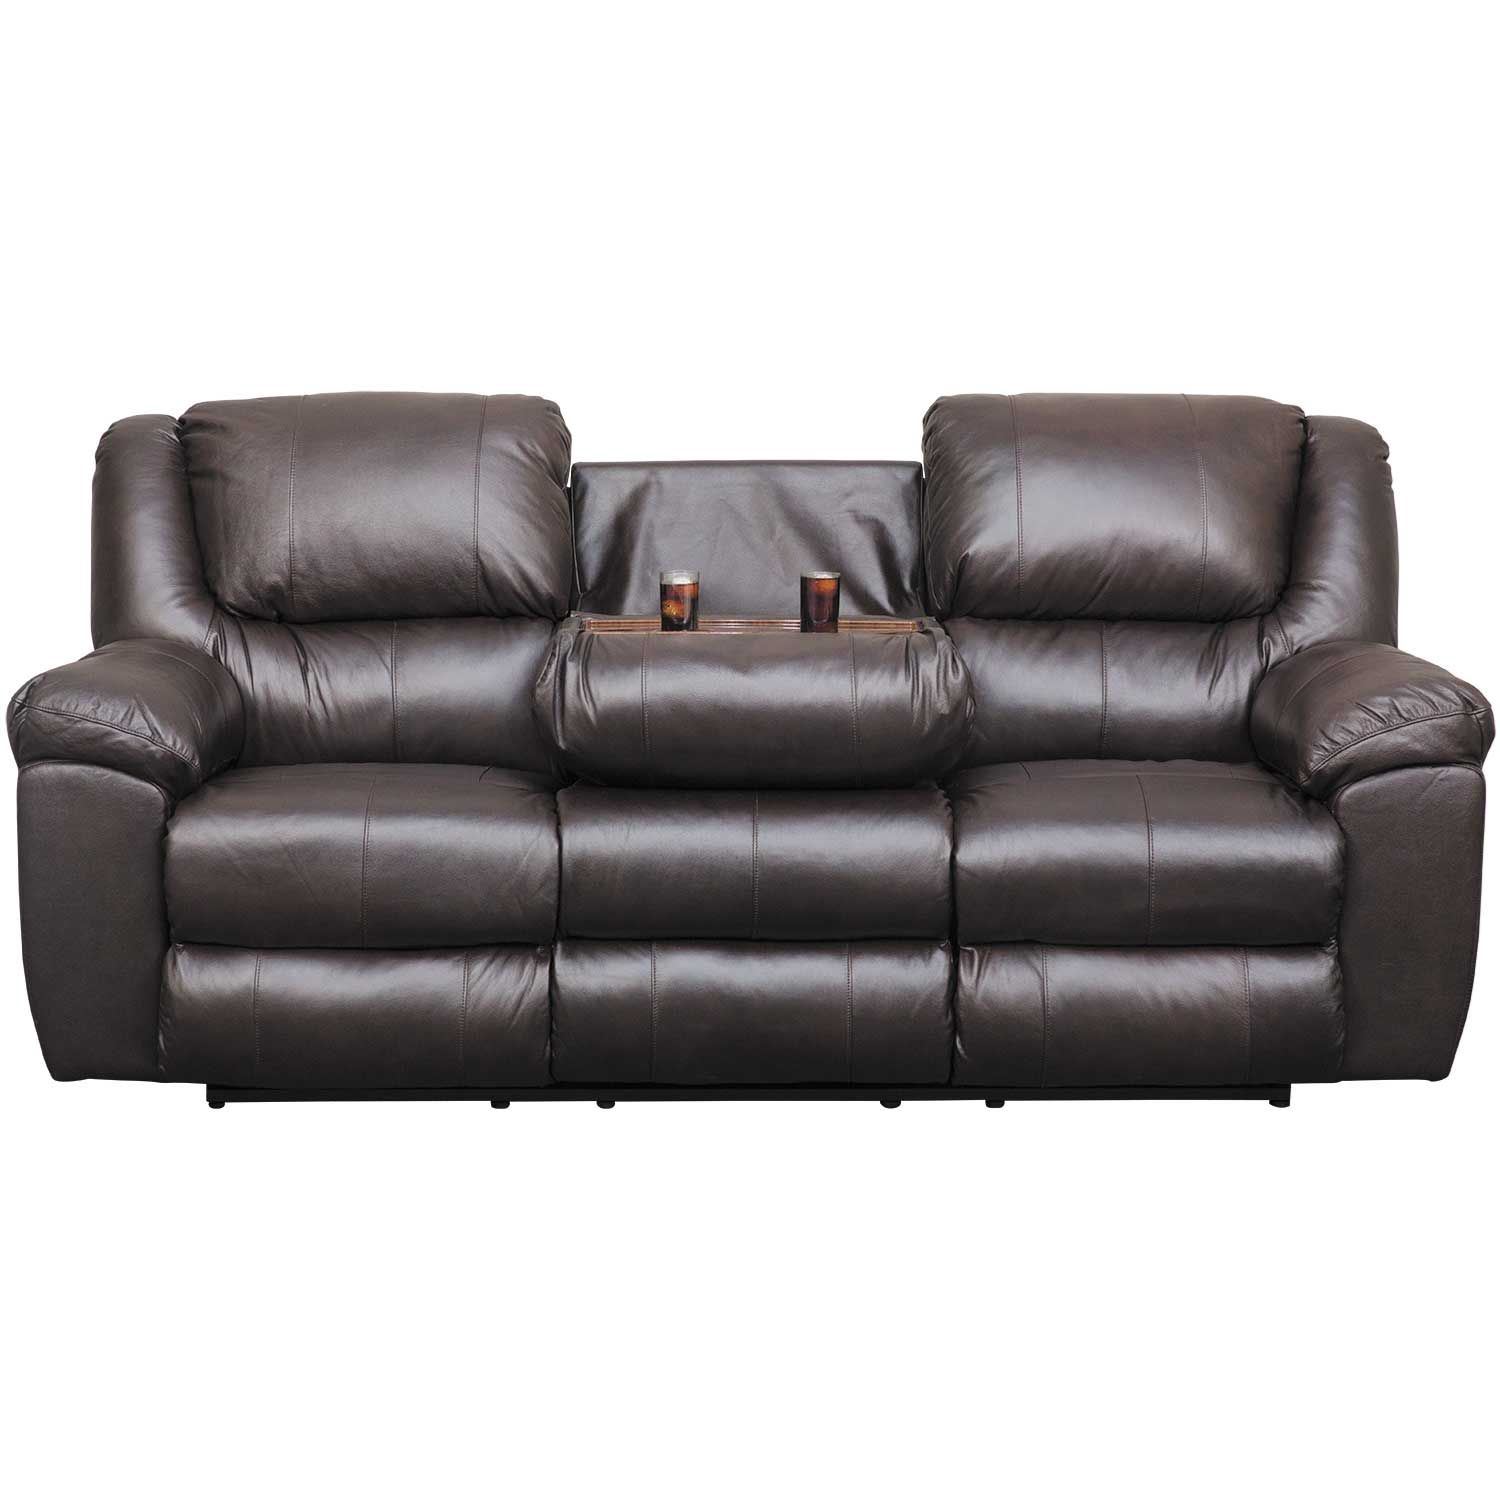 Italian Leather Triple Power Reclining Sofa With Drop Table 649145 Jackson Furniture Catnapper Afw Com